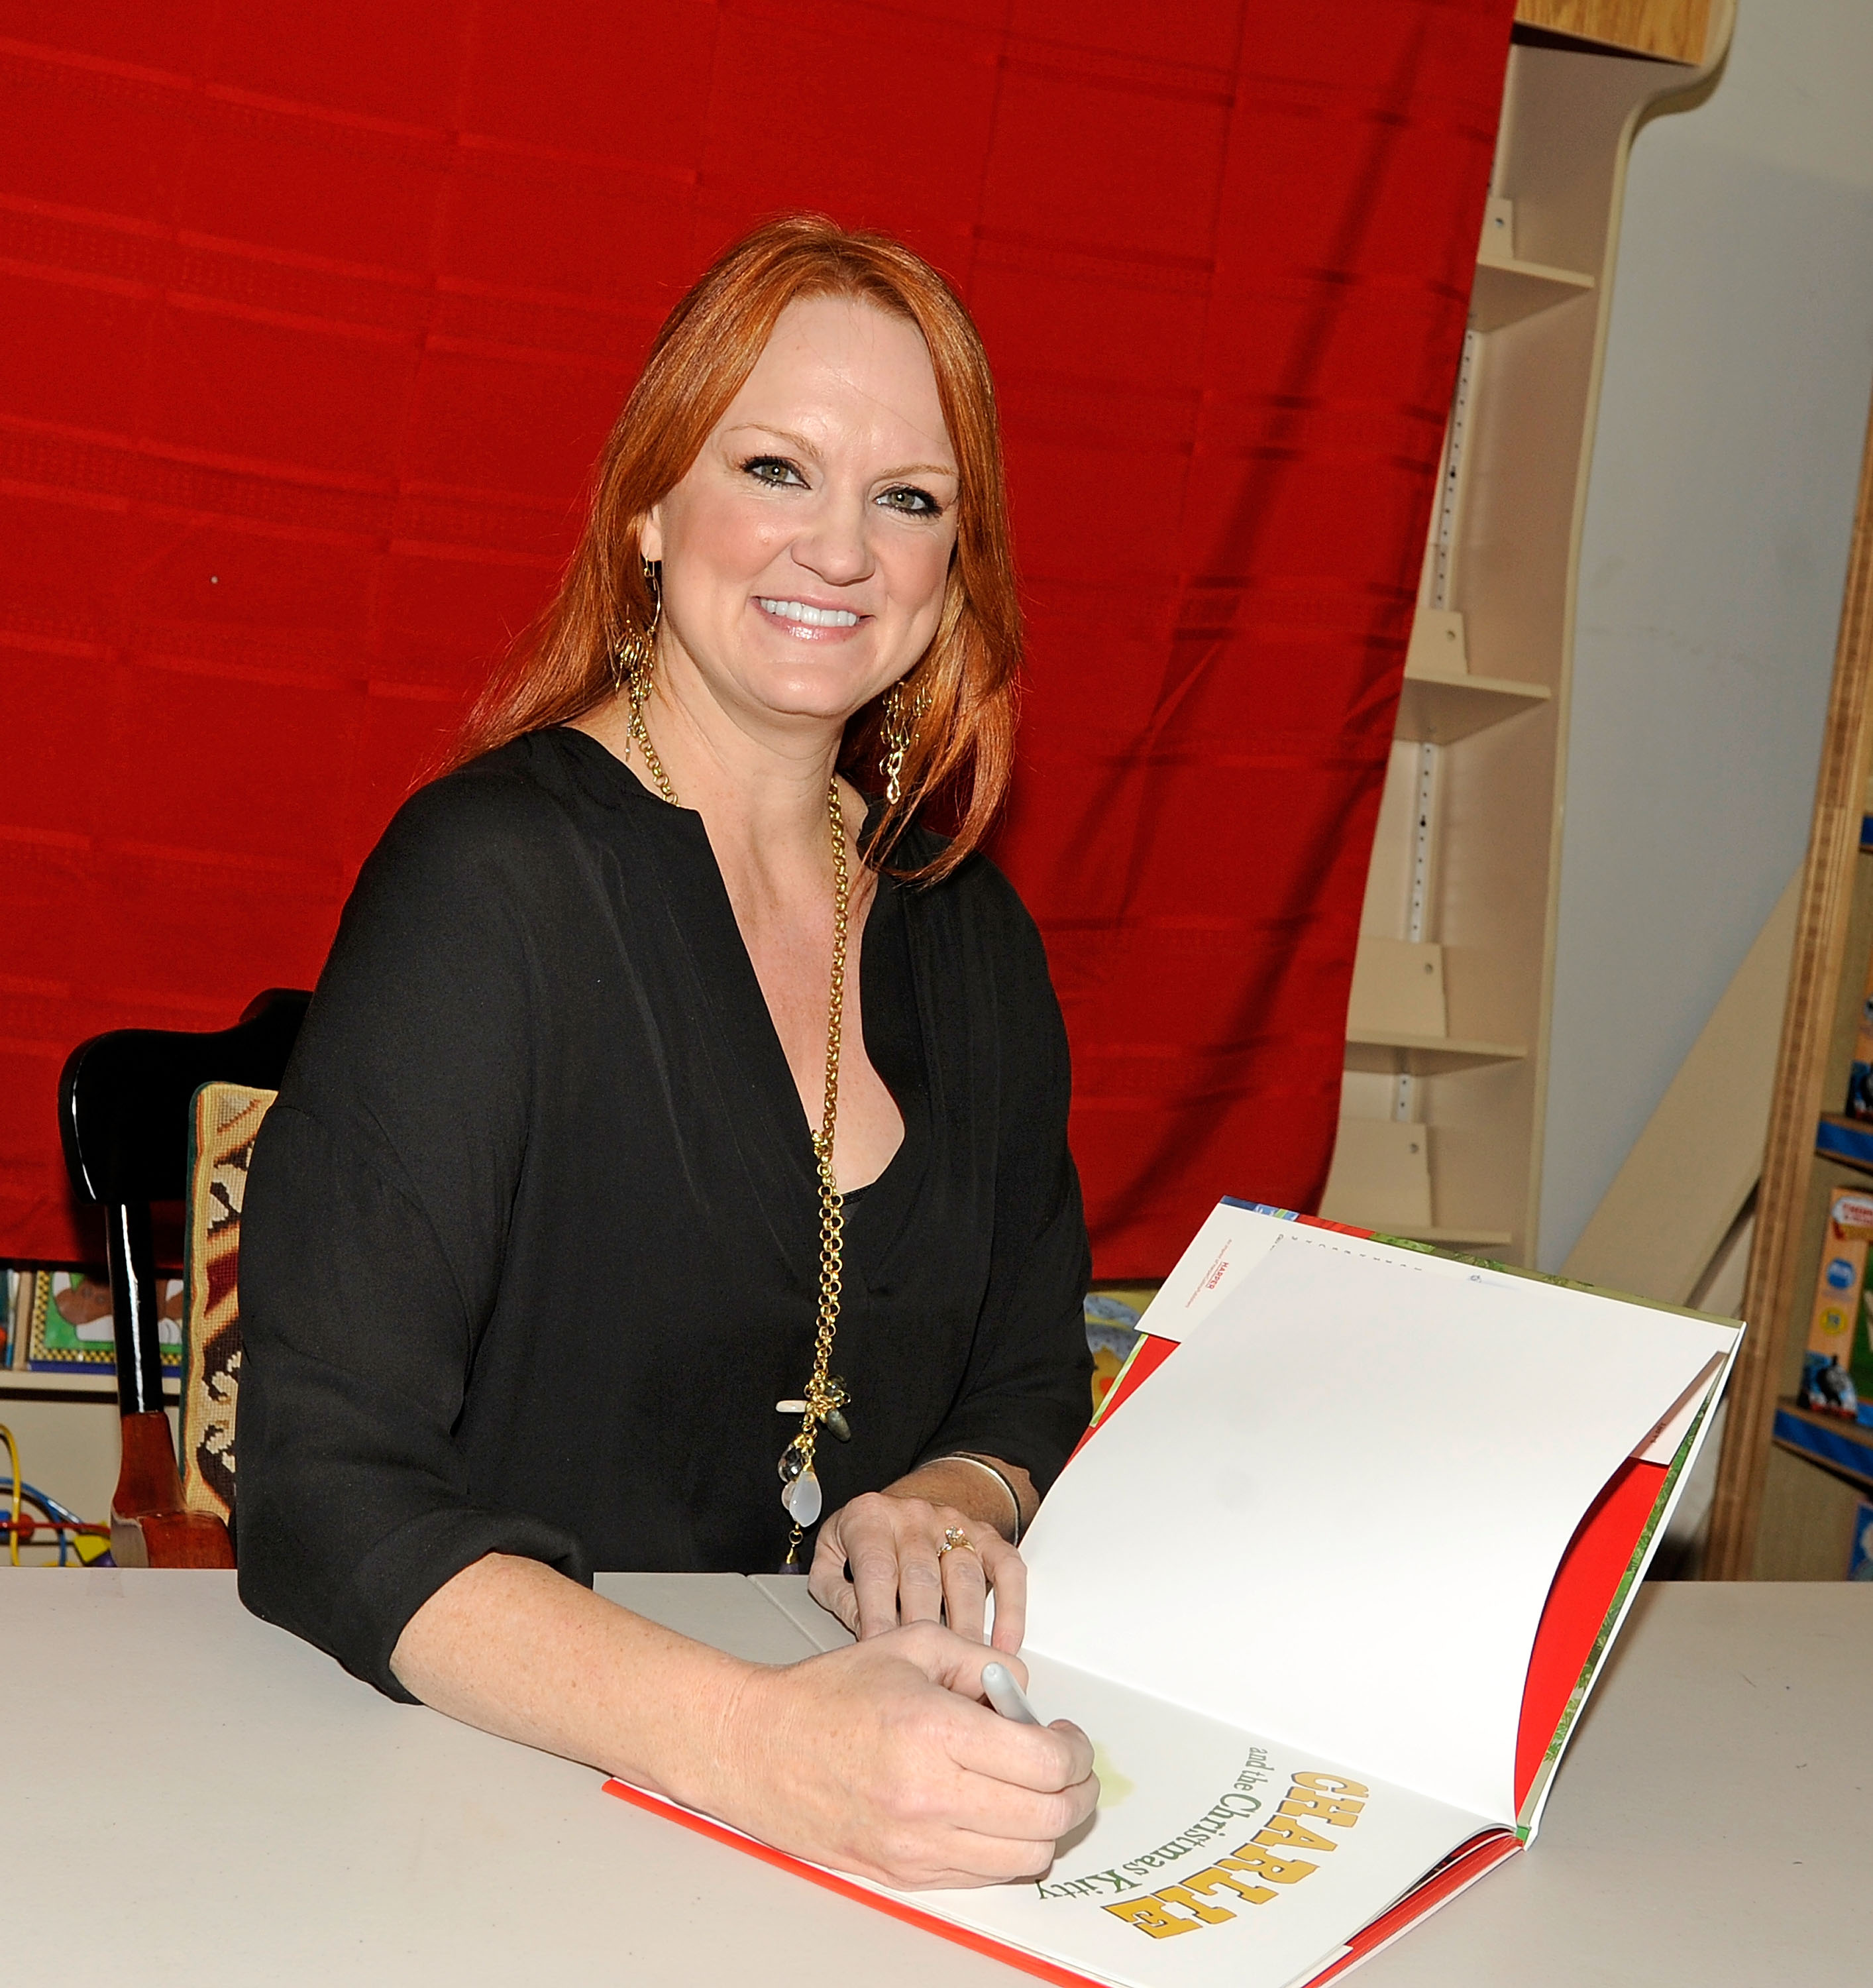 The Pioneer Woman Ree Drummond smiles as she signs a cookbook at a 2012 book signing